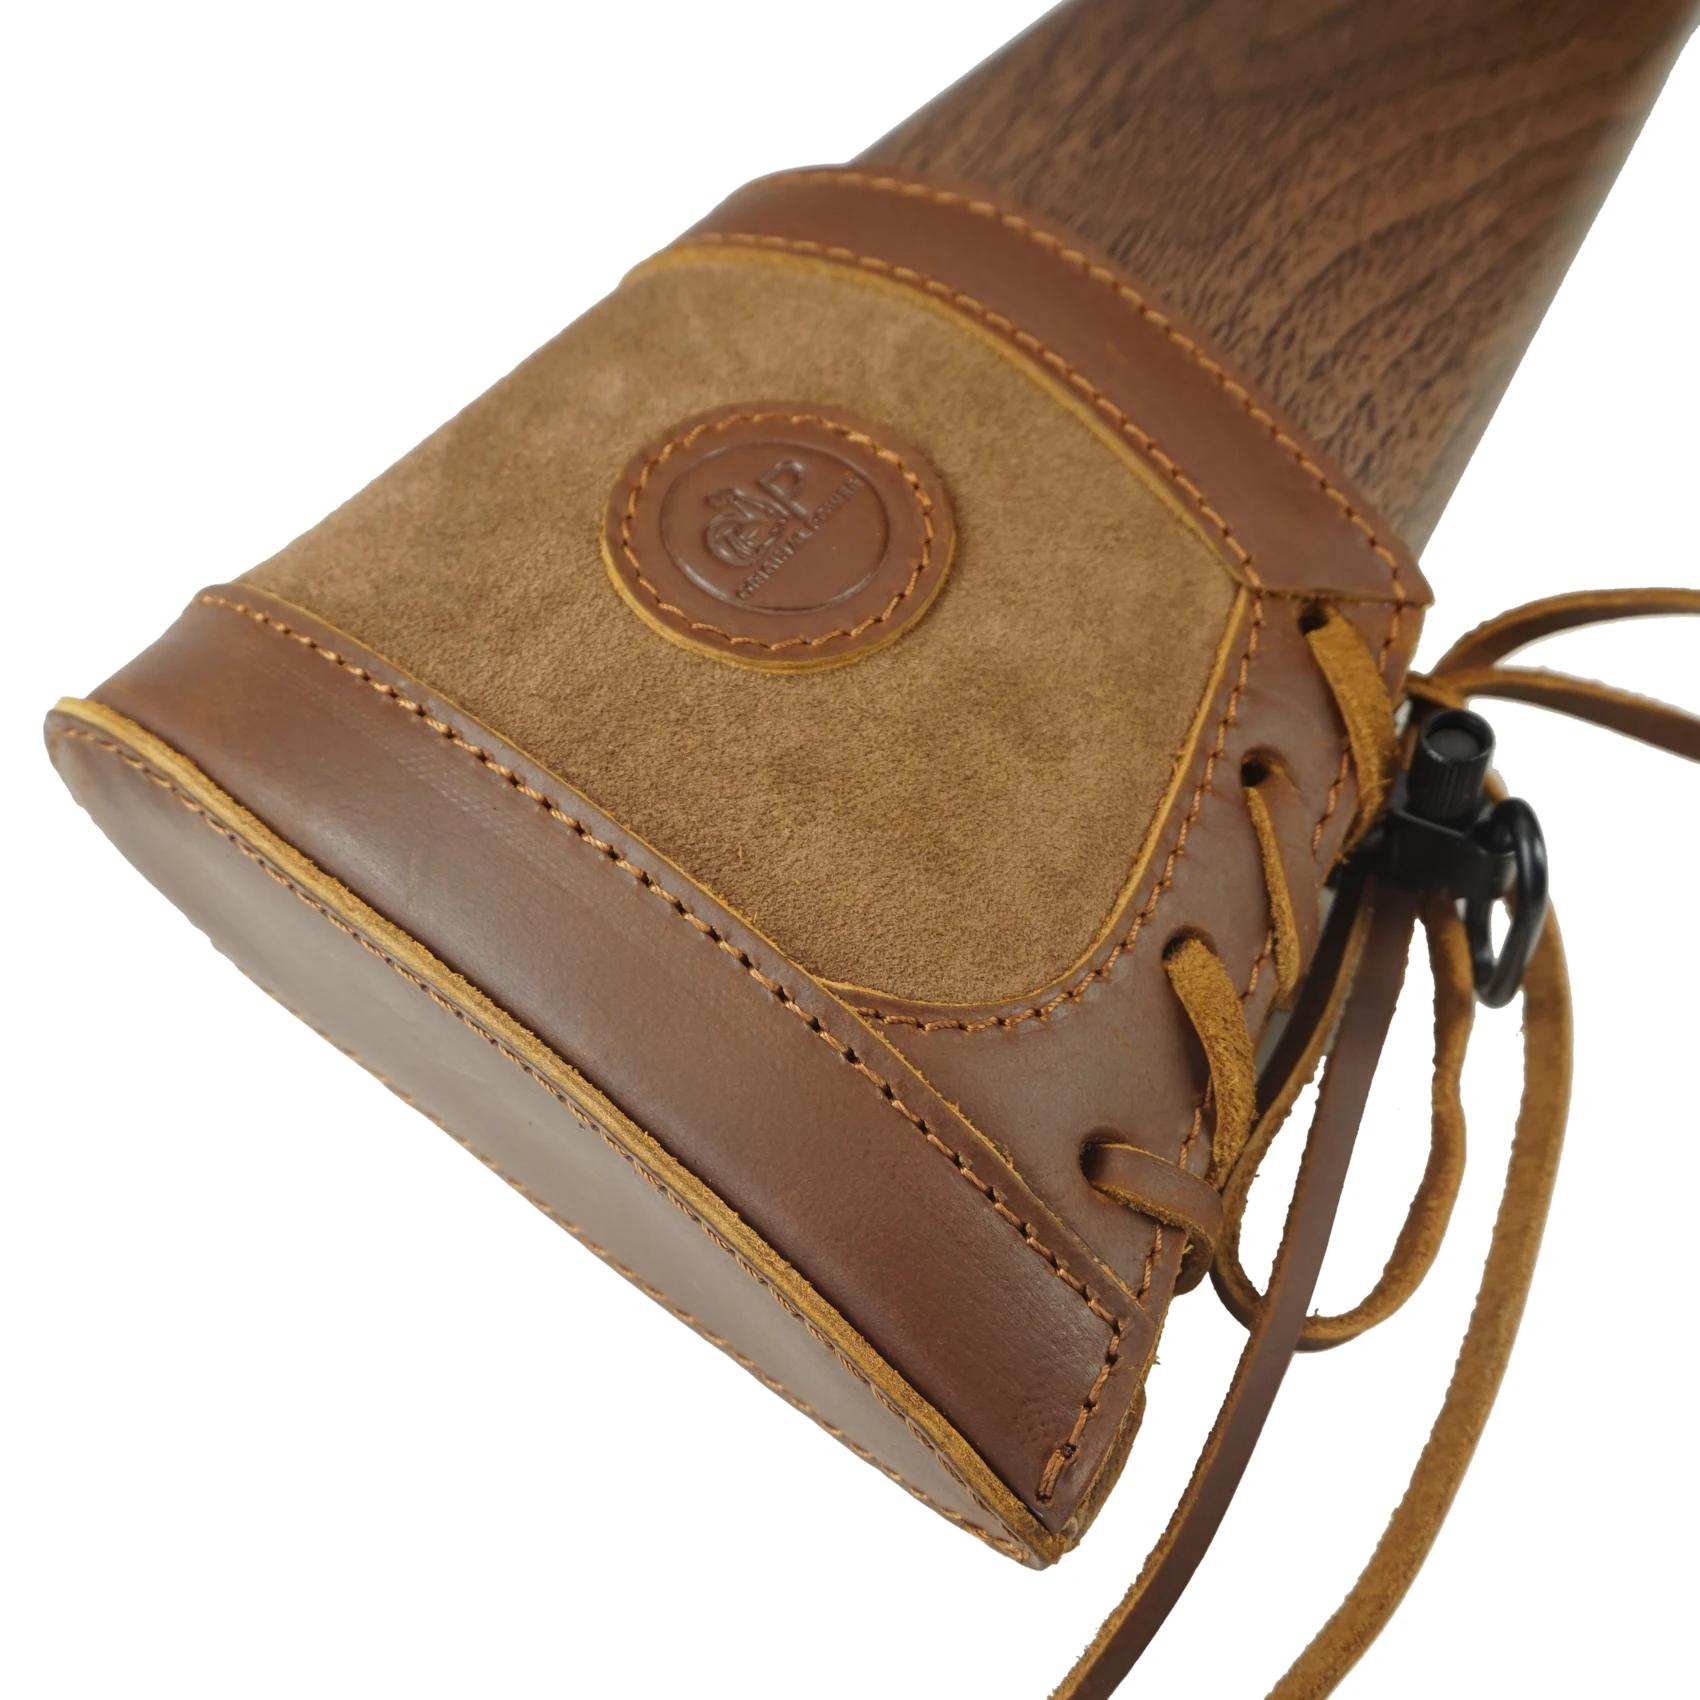 

Soft Suede Leather Rifle Buttstock Gun Slip On Recoil Pad Shotgun Butt Protector Cover Handmade